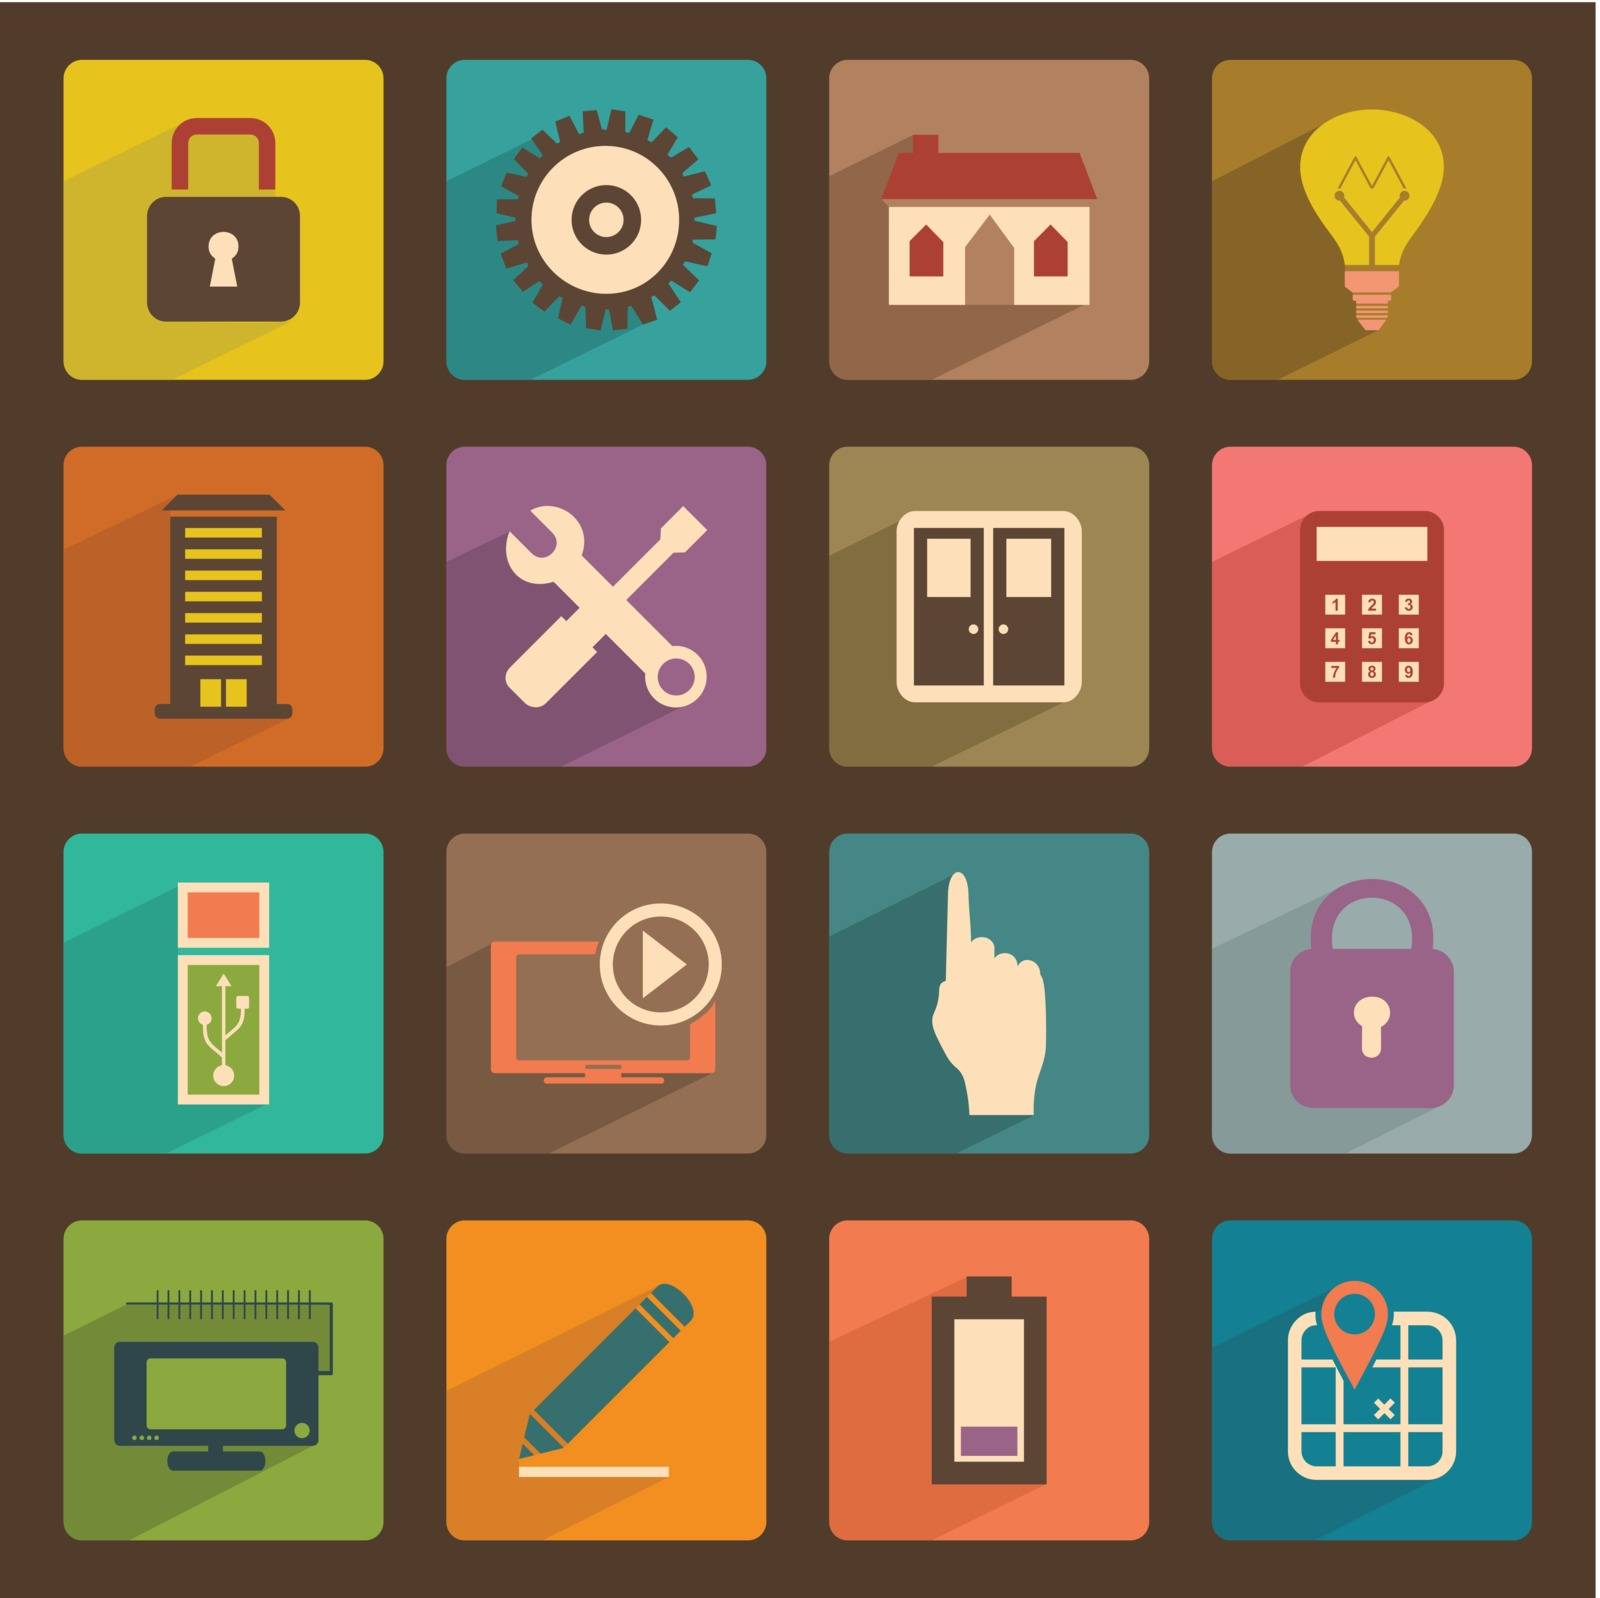 Set of flat icons. A vector illustration